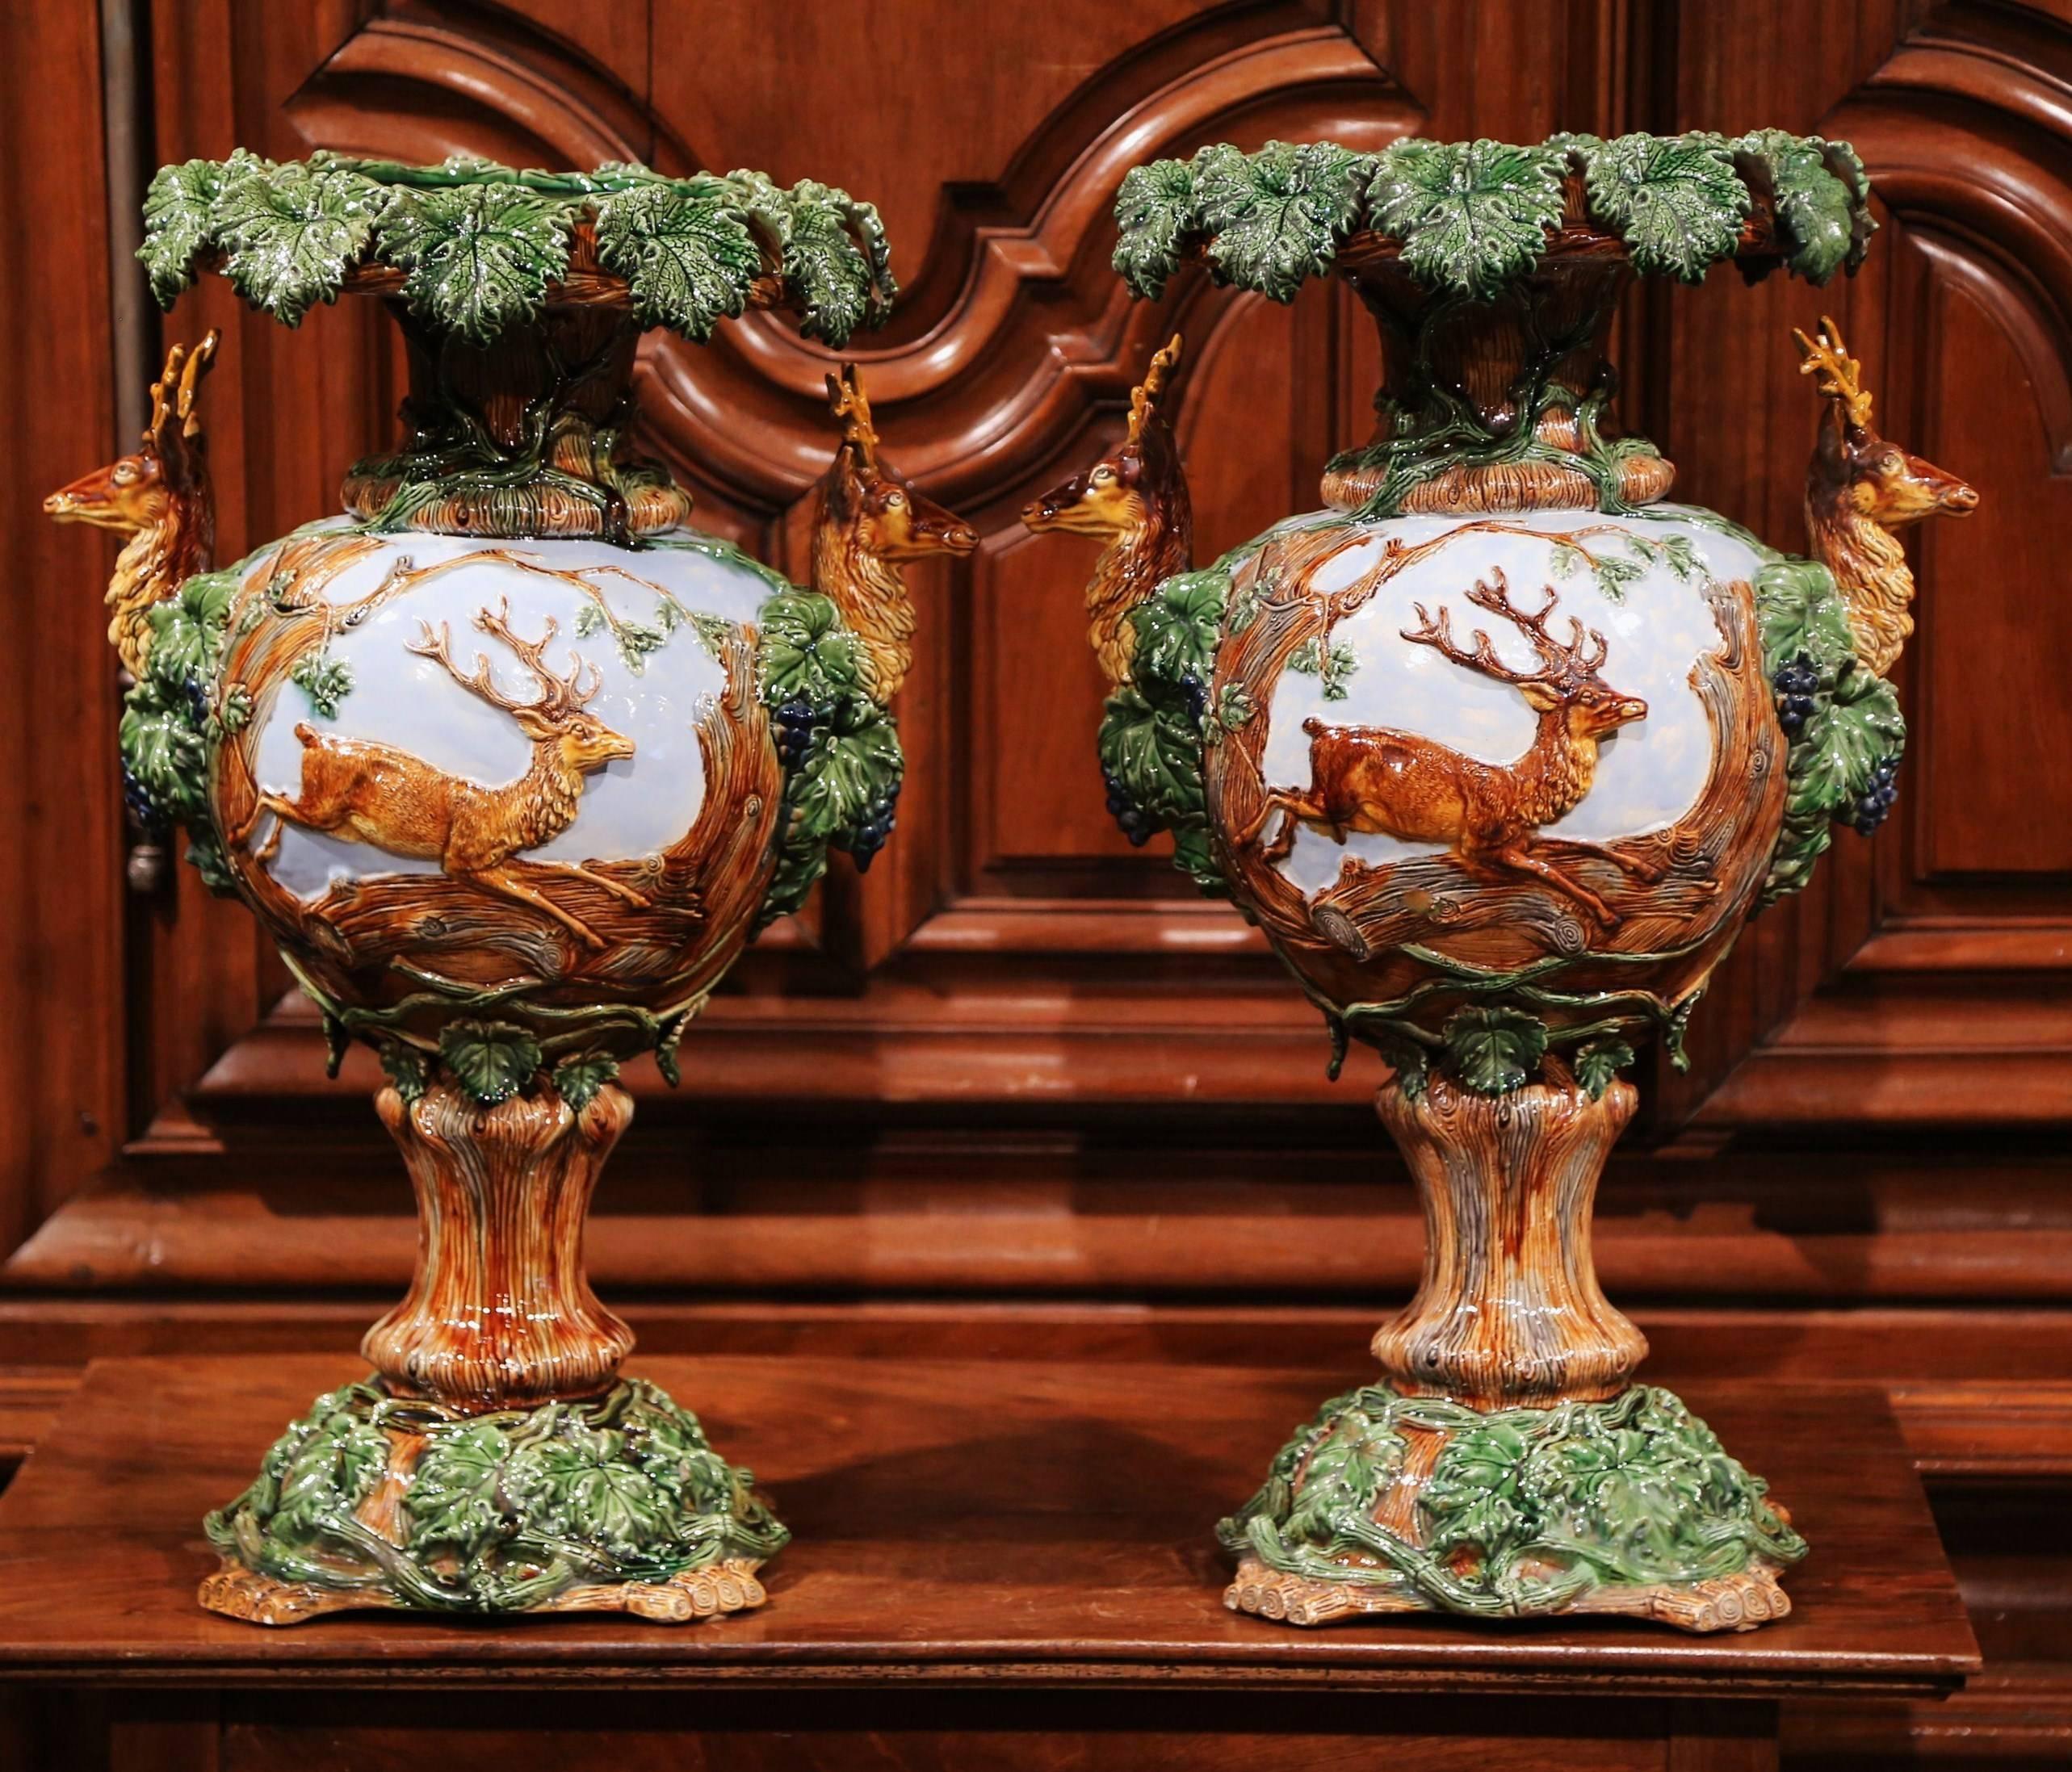 Faience Pair of 19th Century French Painted Barbotine Vases with Deer, Grapes and Vines